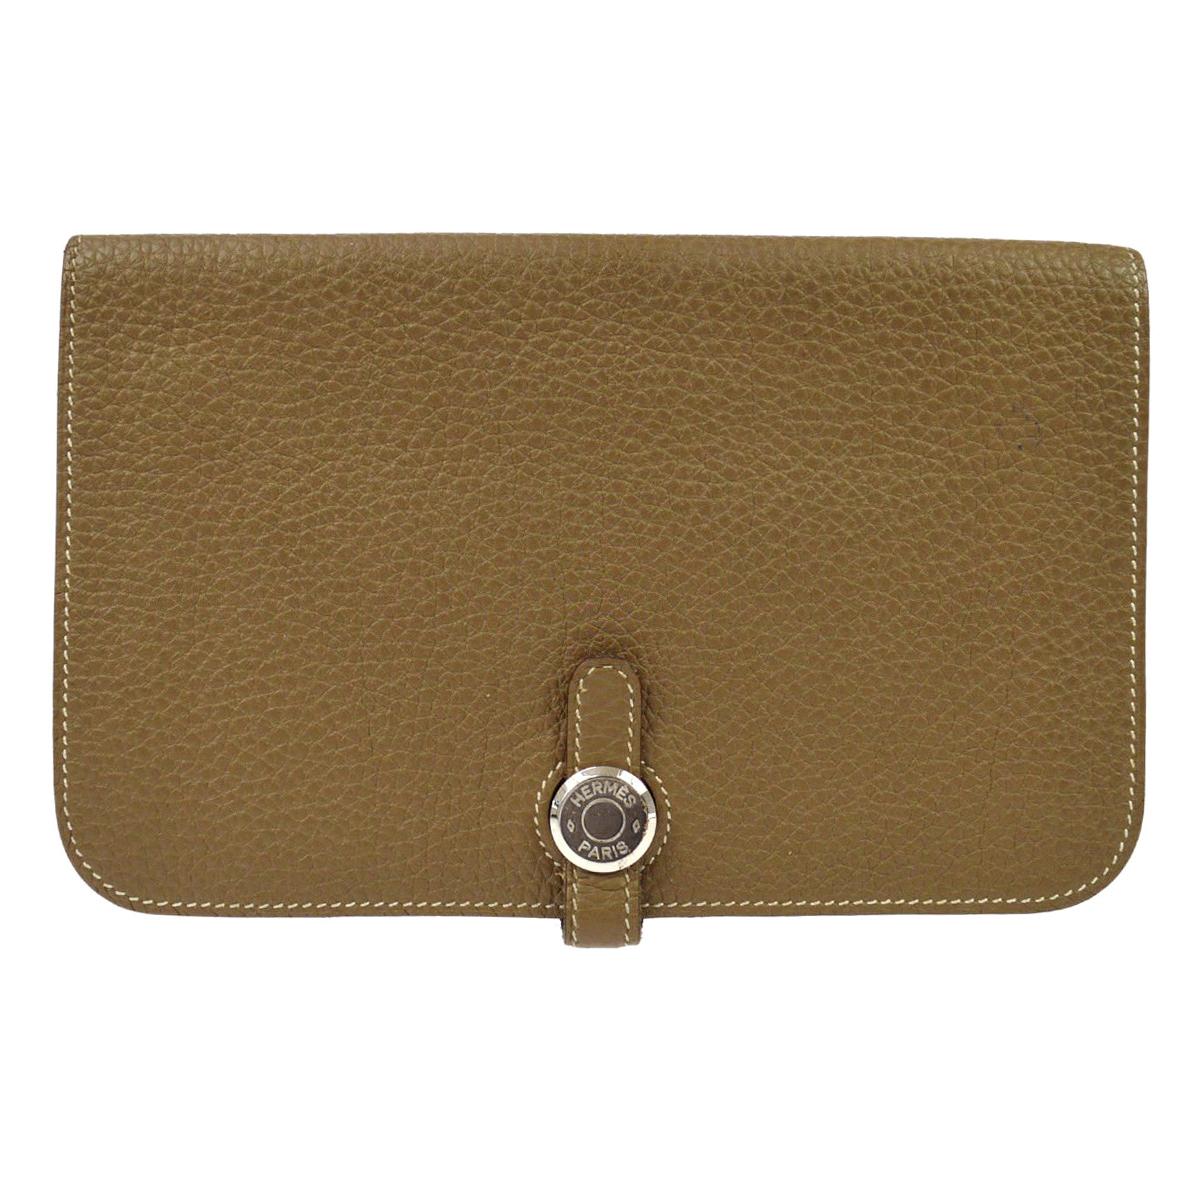 Hermes Tan Taupe Leather Silver Fold Over Flap Evening Wallet Clutch Bag